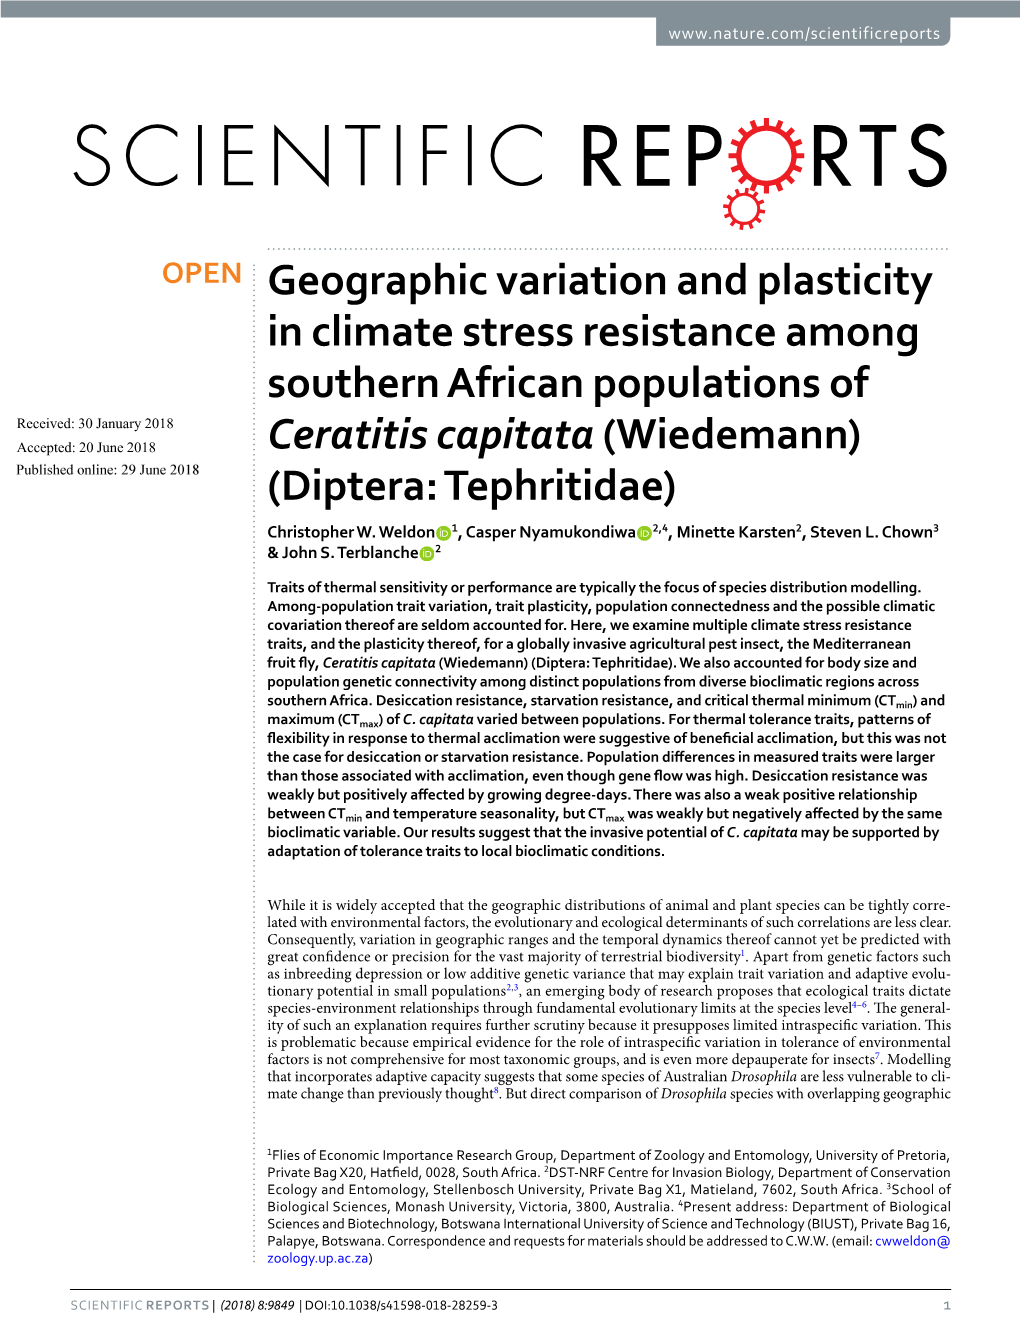 Geographic Variation and Plasticity in Climate Stress Resistance